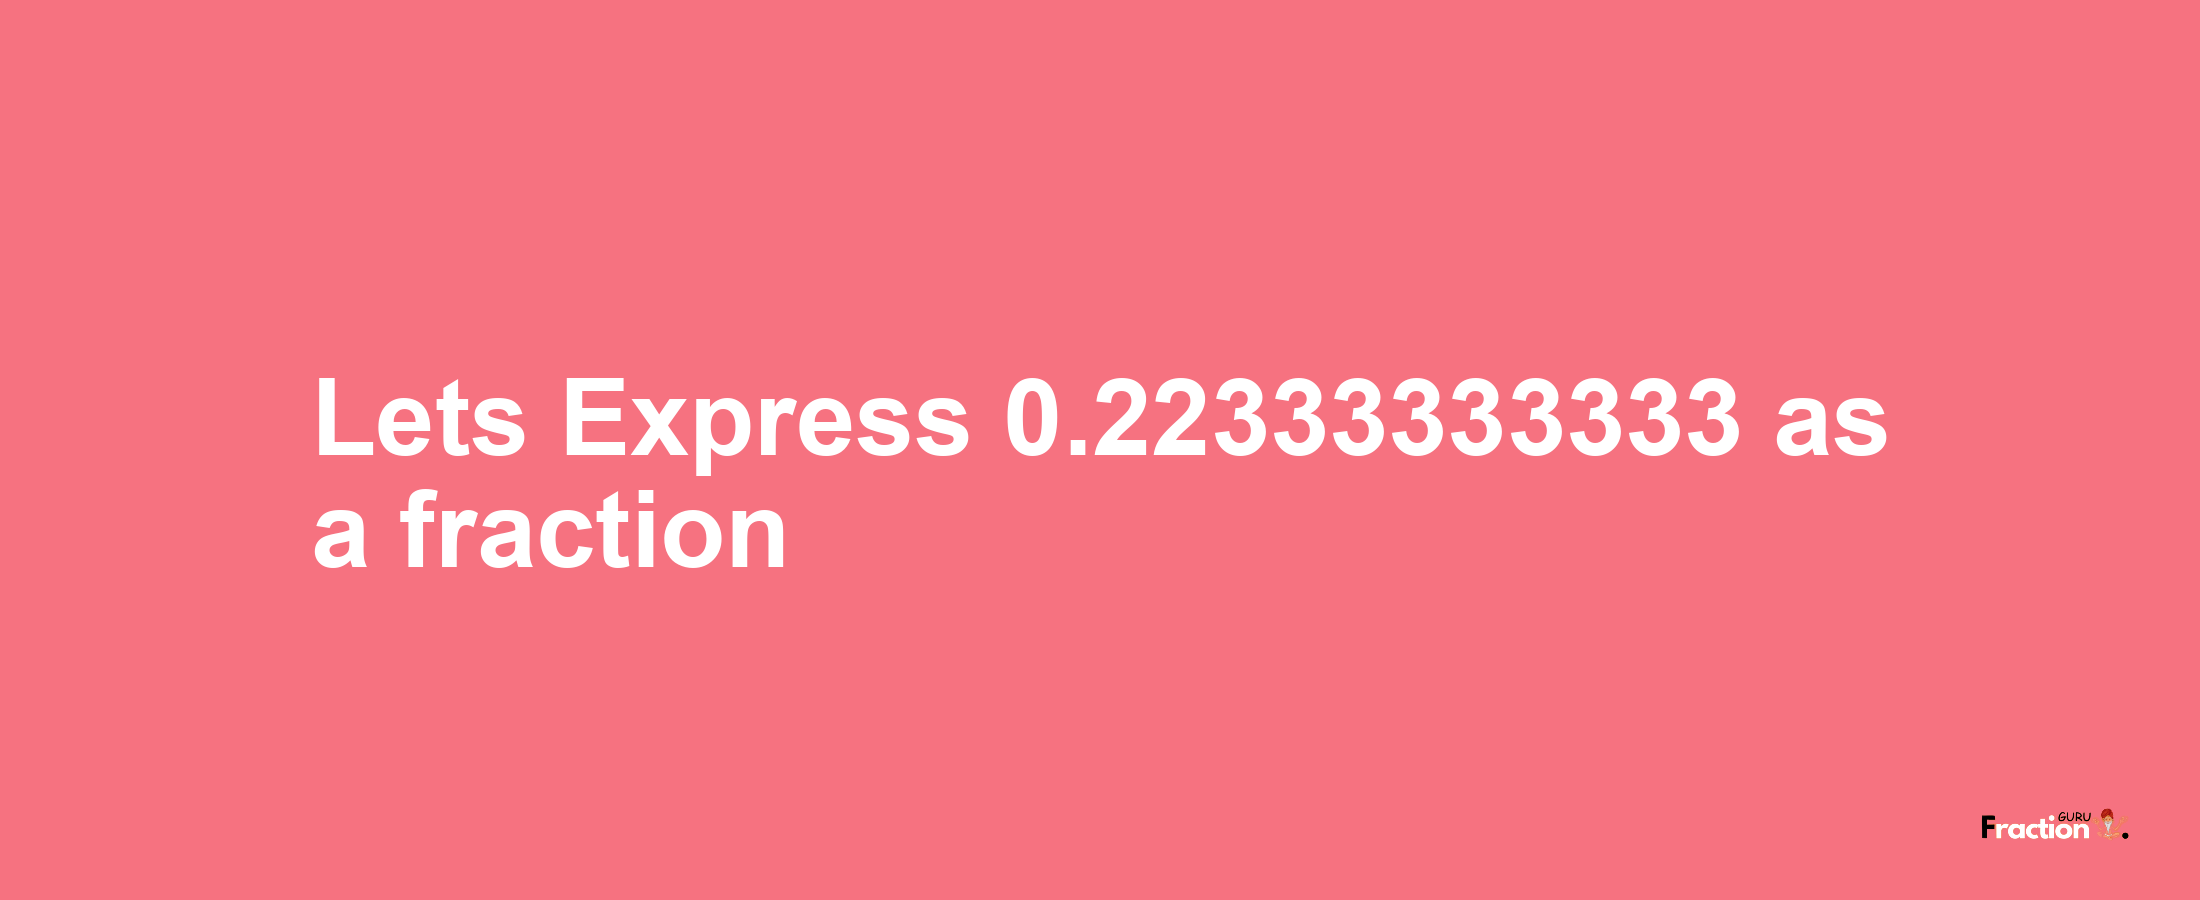 Lets Express 0.22333333333 as afraction